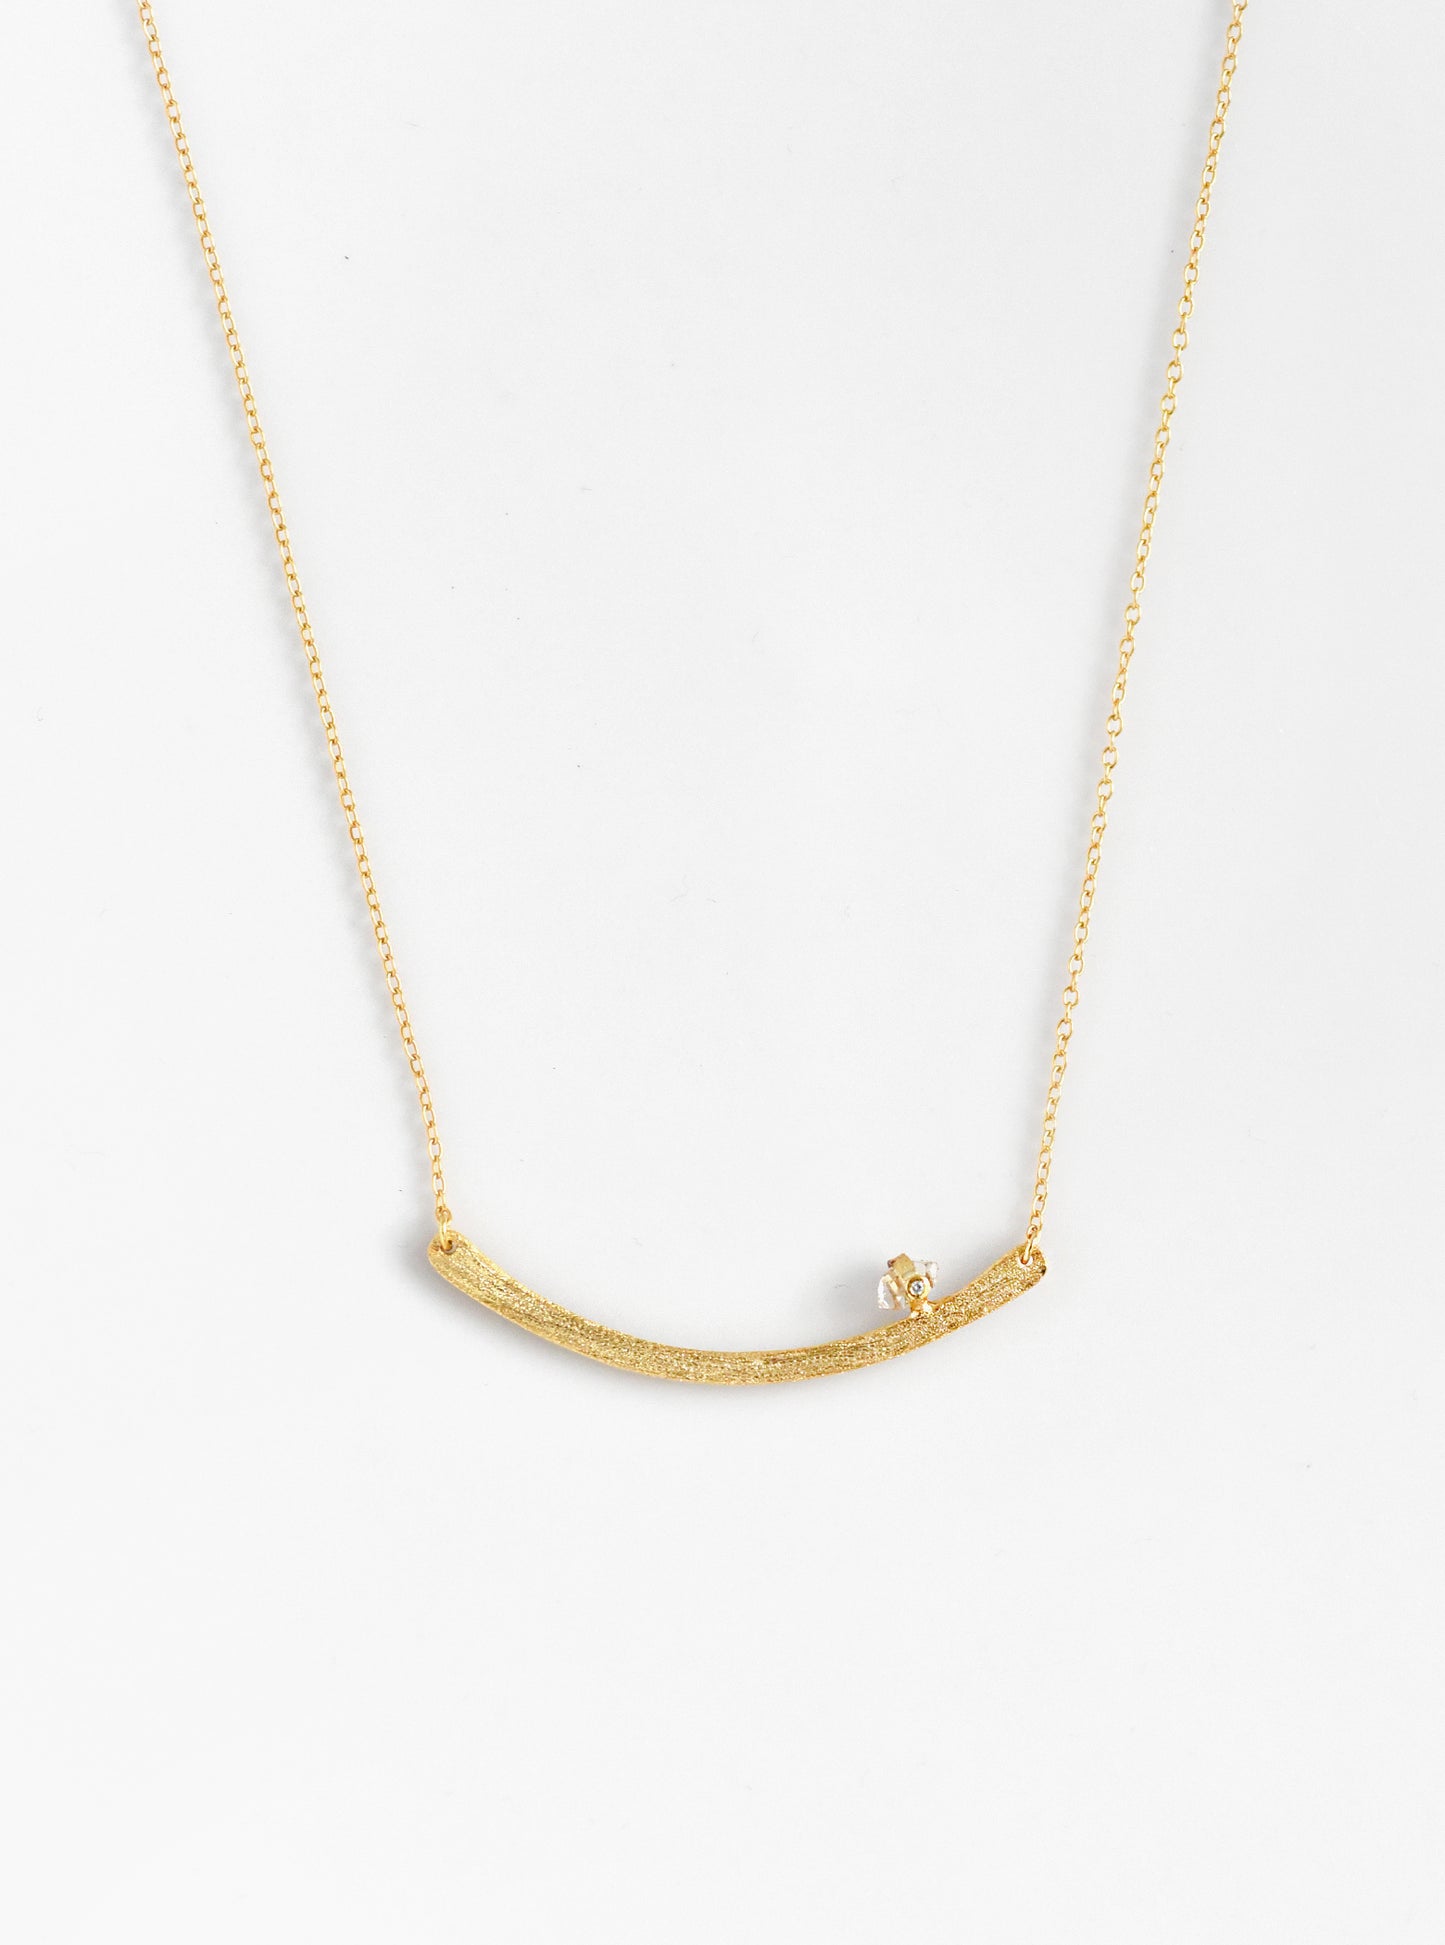 Handmade Curved Bar with Herkimer and Diamond Necklace